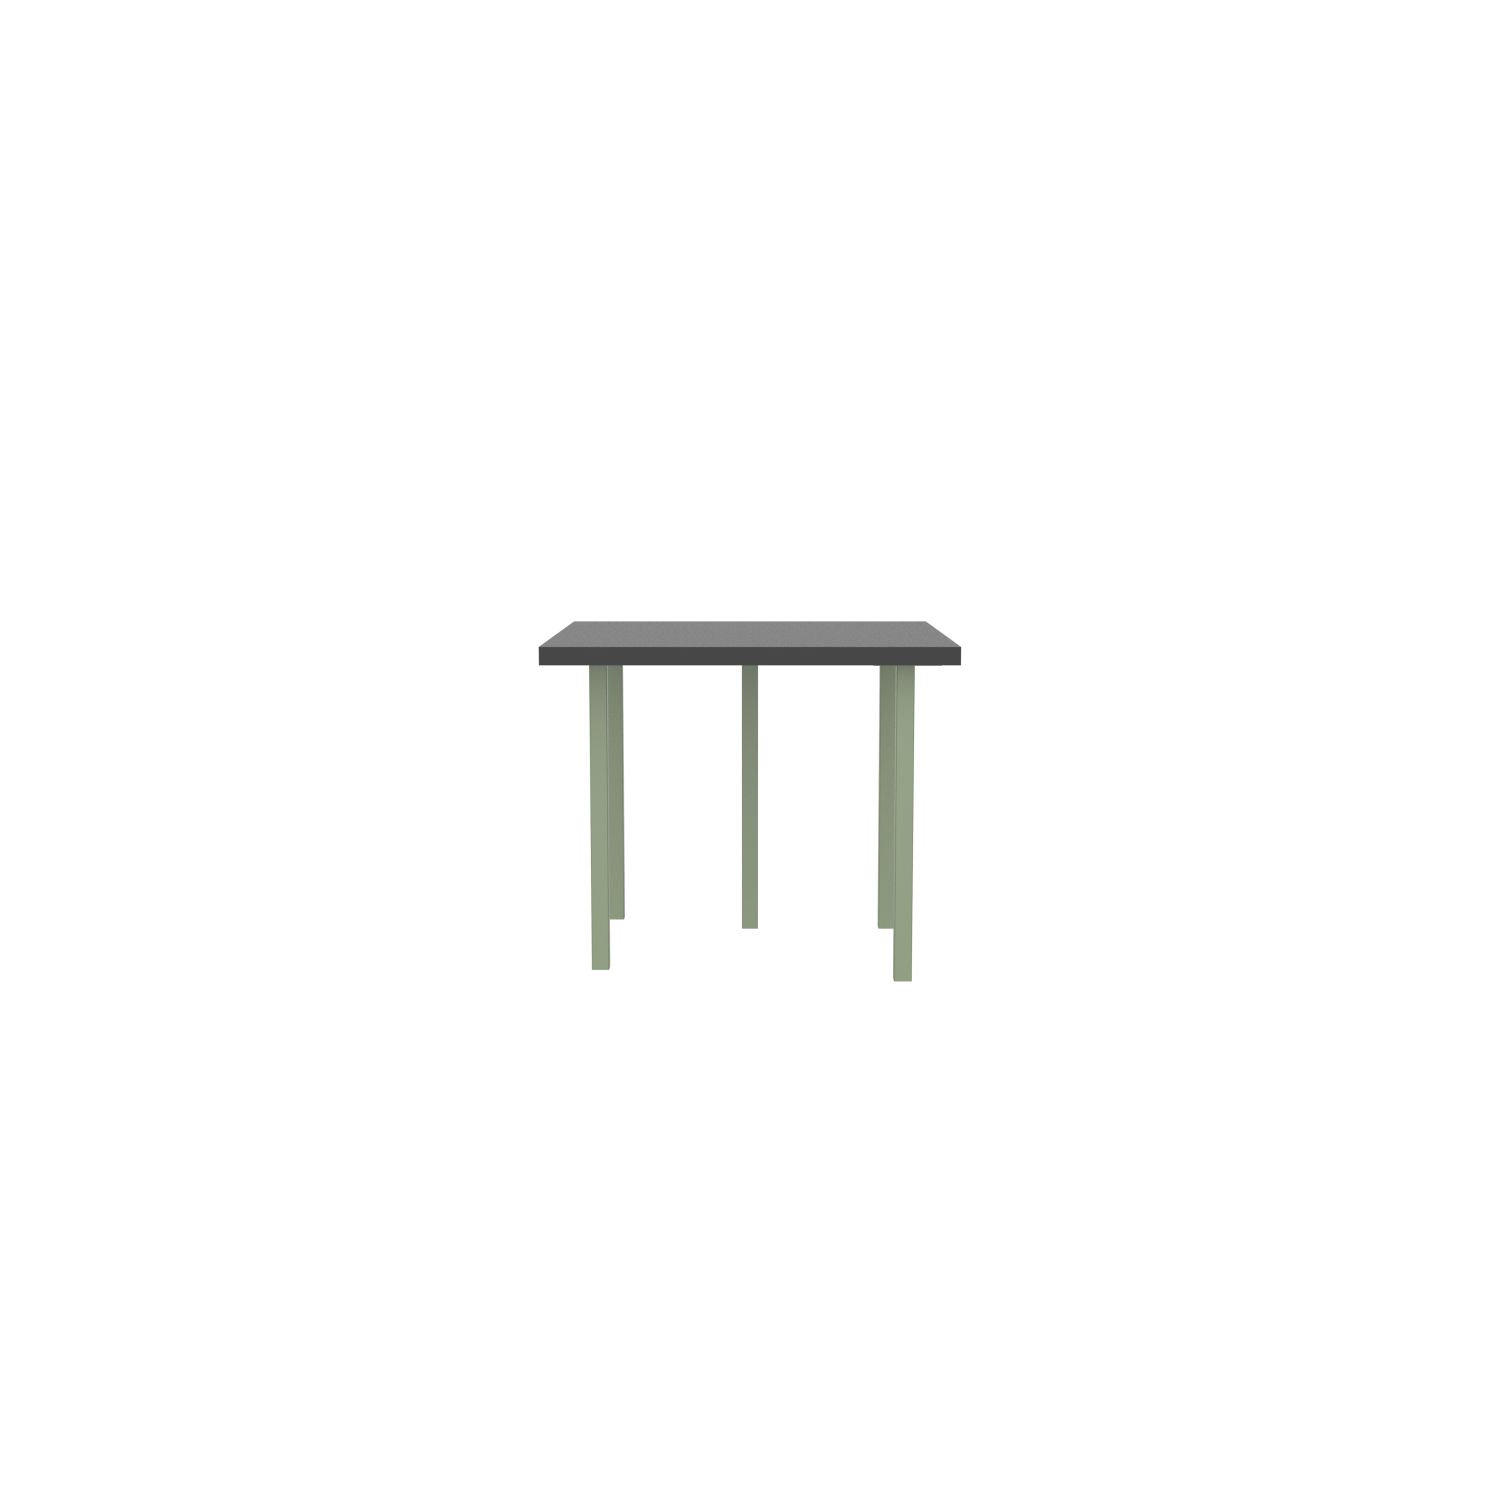 lensvelt bbrand table five fixed heigt 915x915 hpl black 50 mm price level 1 green ral6021